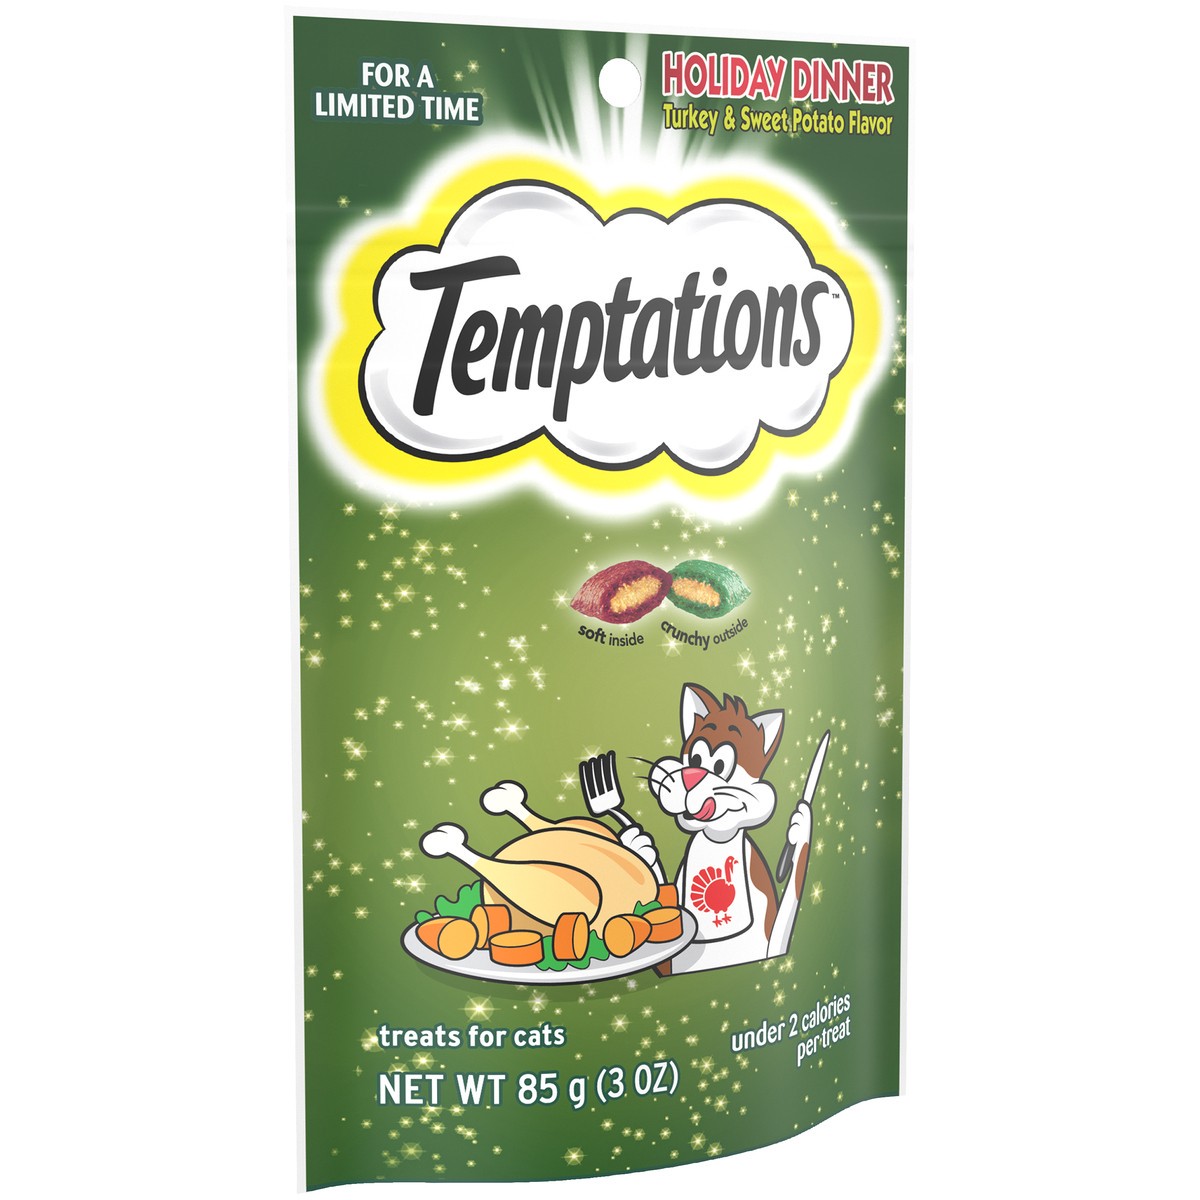 slide 2 of 9, Temptations Holiday Dinner Cat Treats 3 oz. Pouch, 3 oz